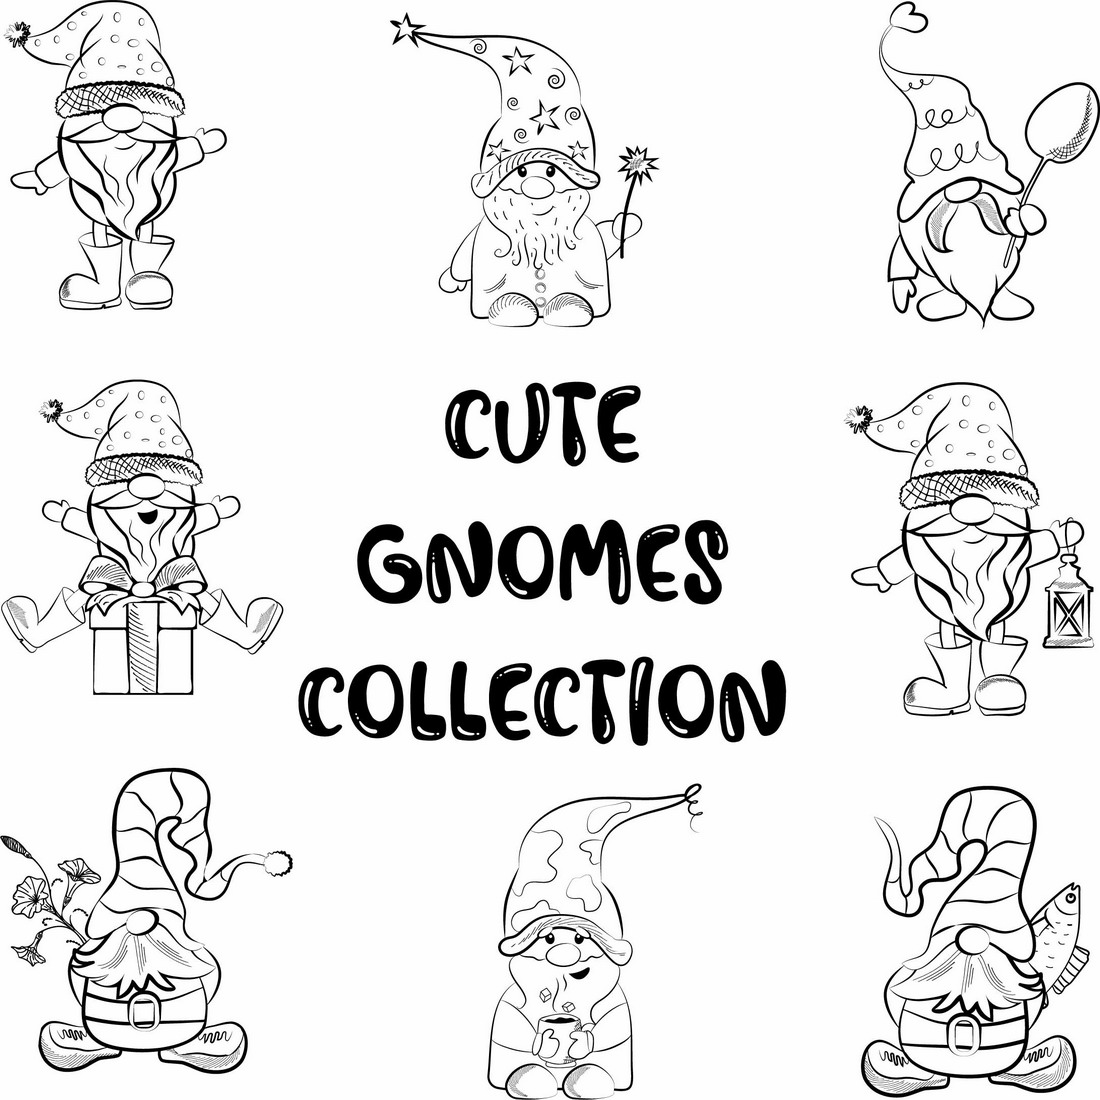 Cute Gnomes Collection Cover.